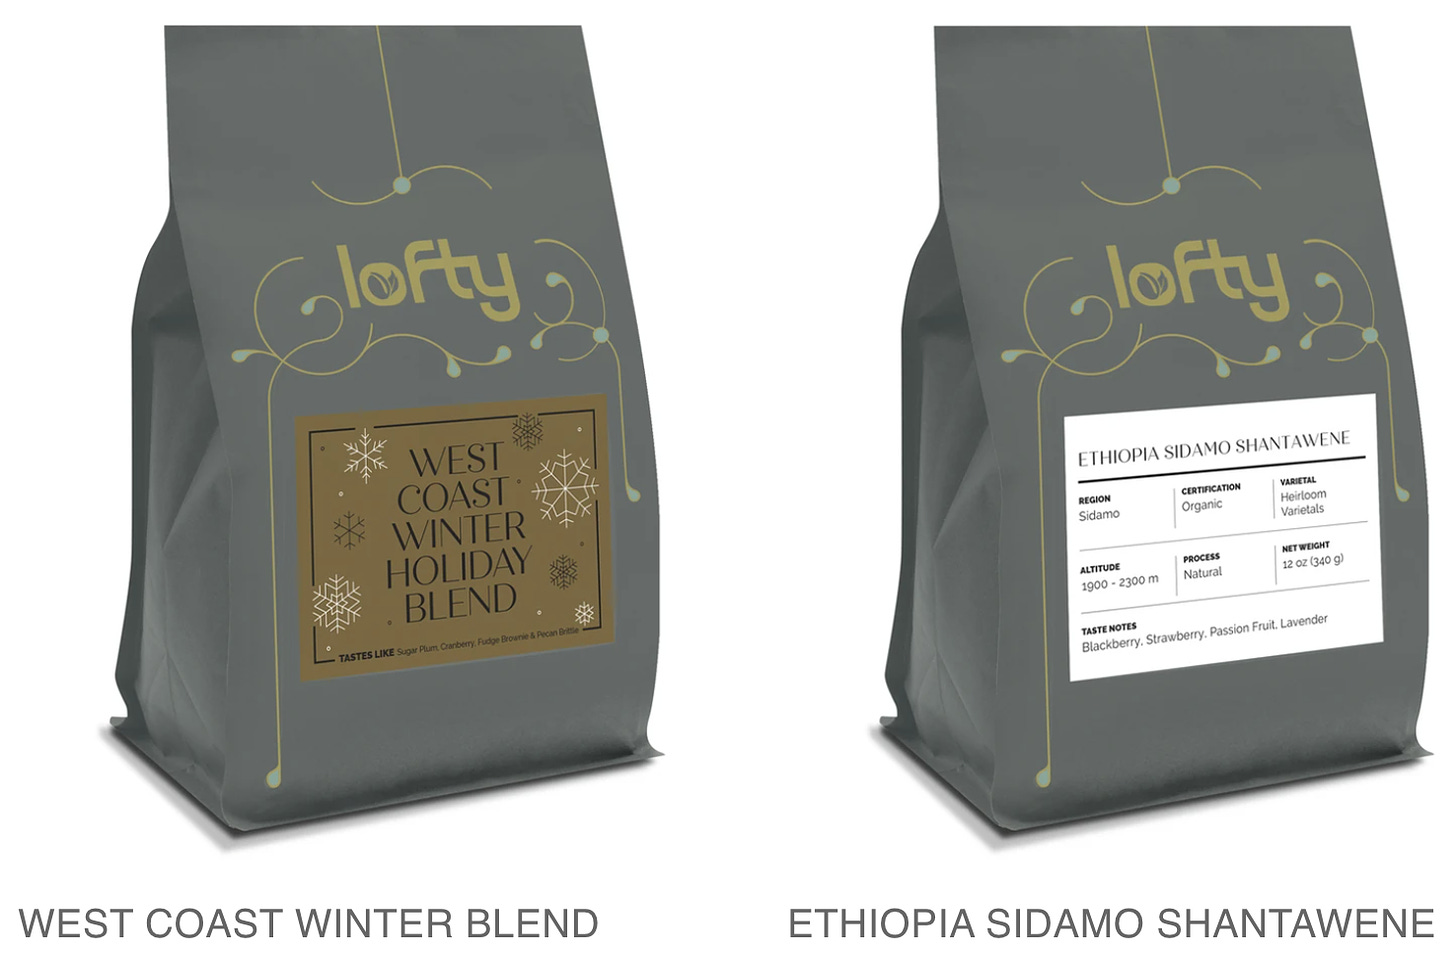 Grey bags of Lofty Coffee West Coast Winter Holiday Blend coffee beans on a white background.